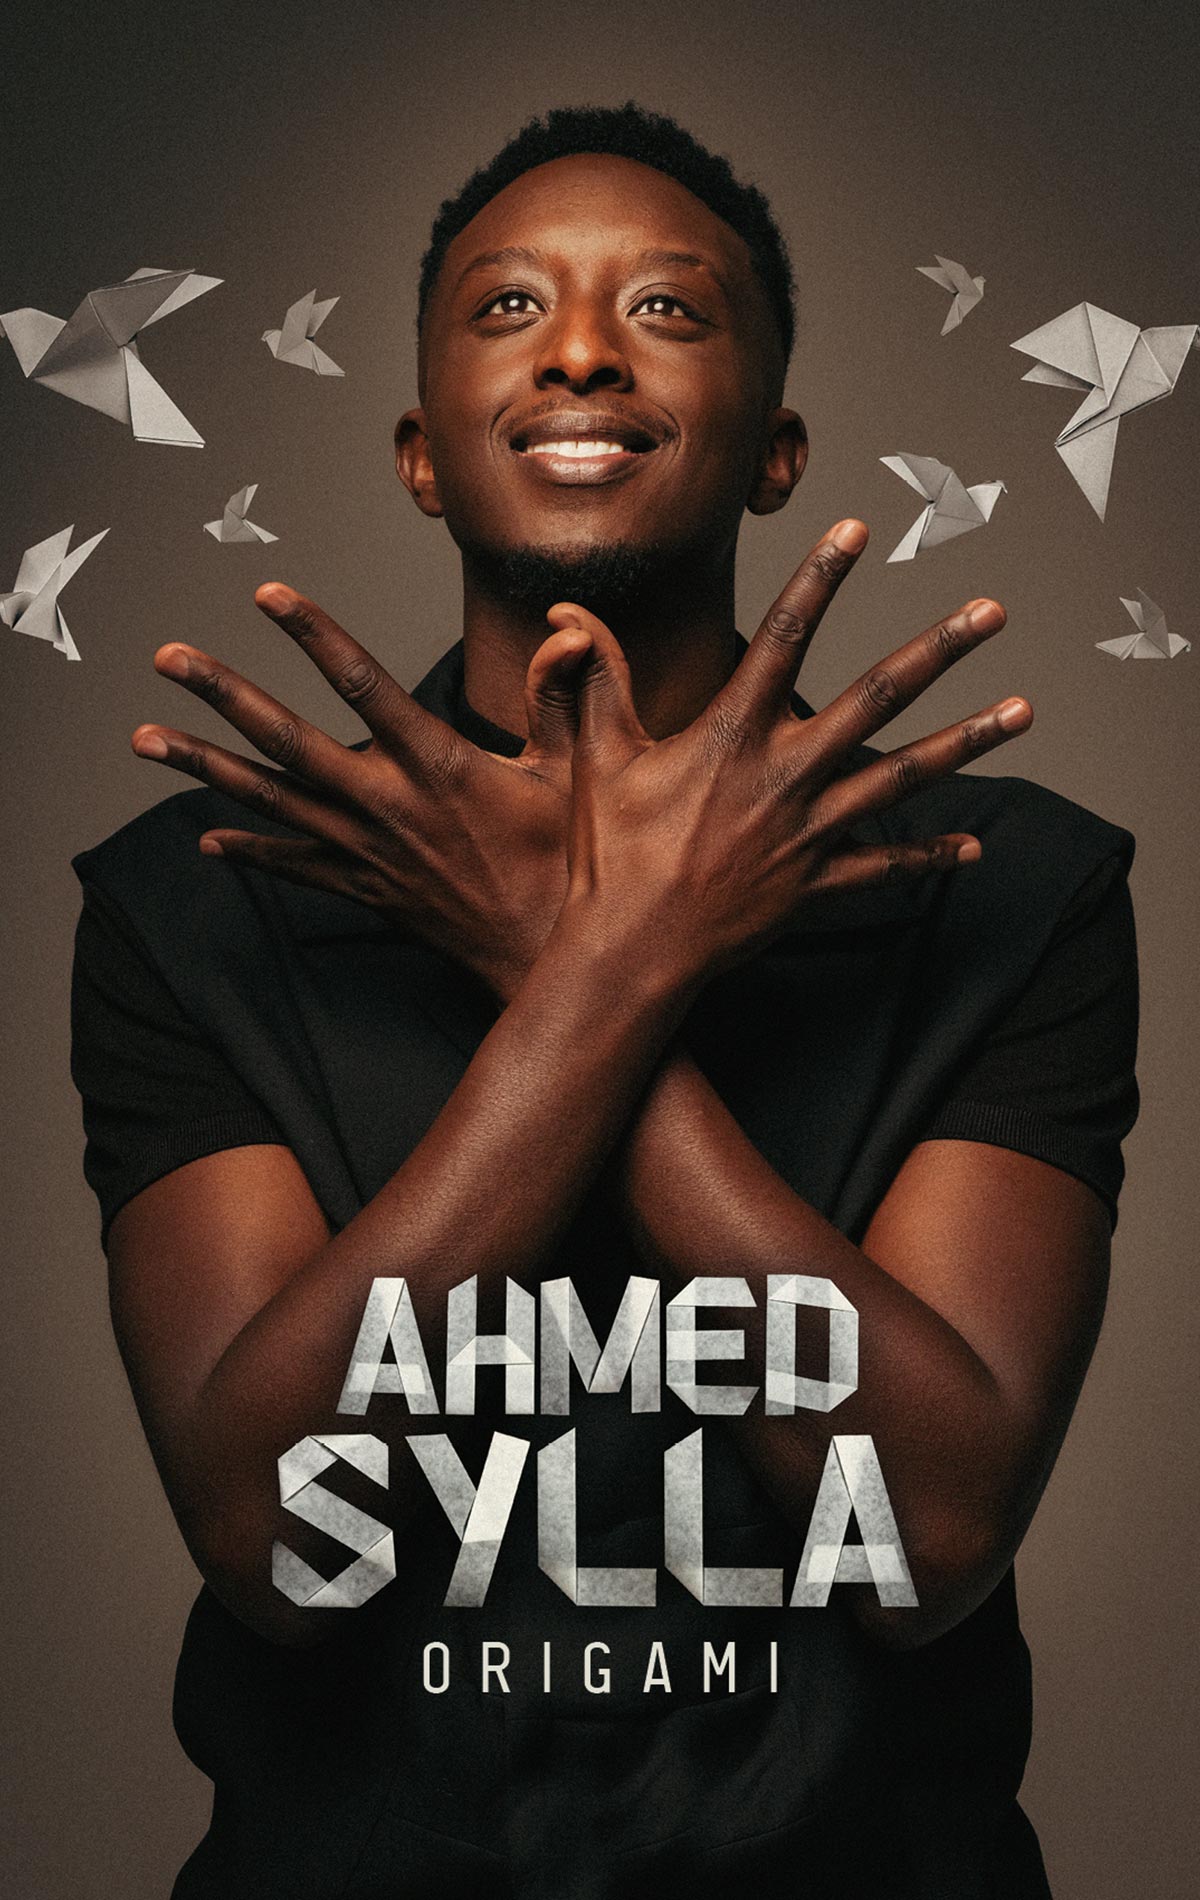 Billets Ahmed Sylla - Origami (Capitole-en-champagne - Chalons En Champagne)